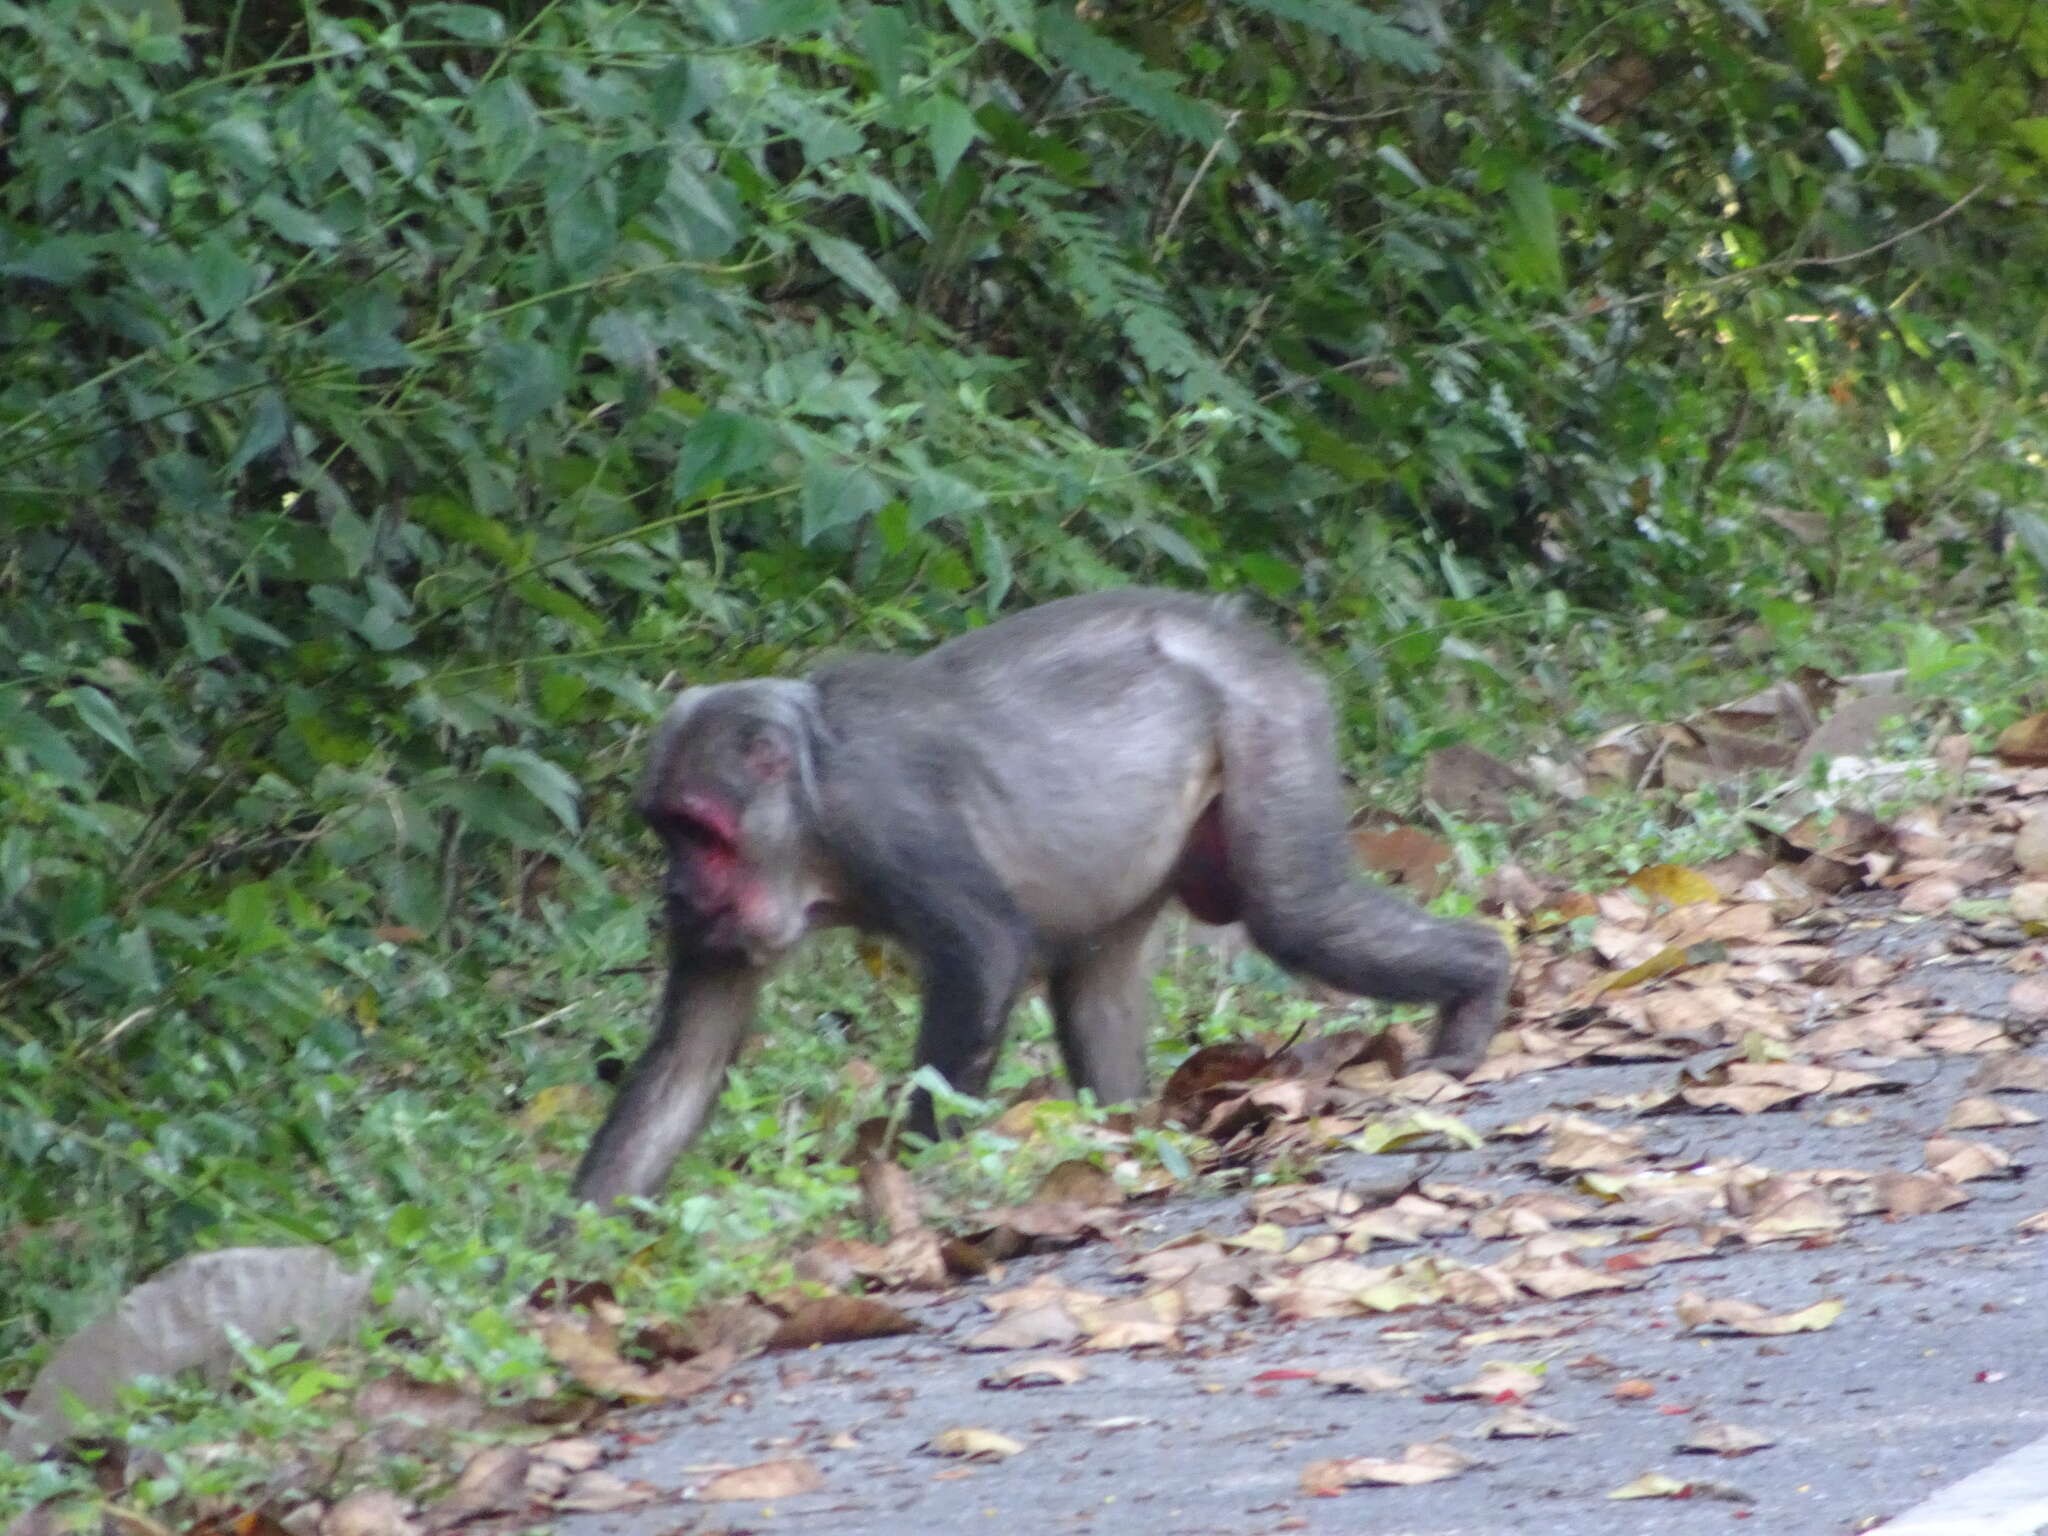 Image of Bear Macaque